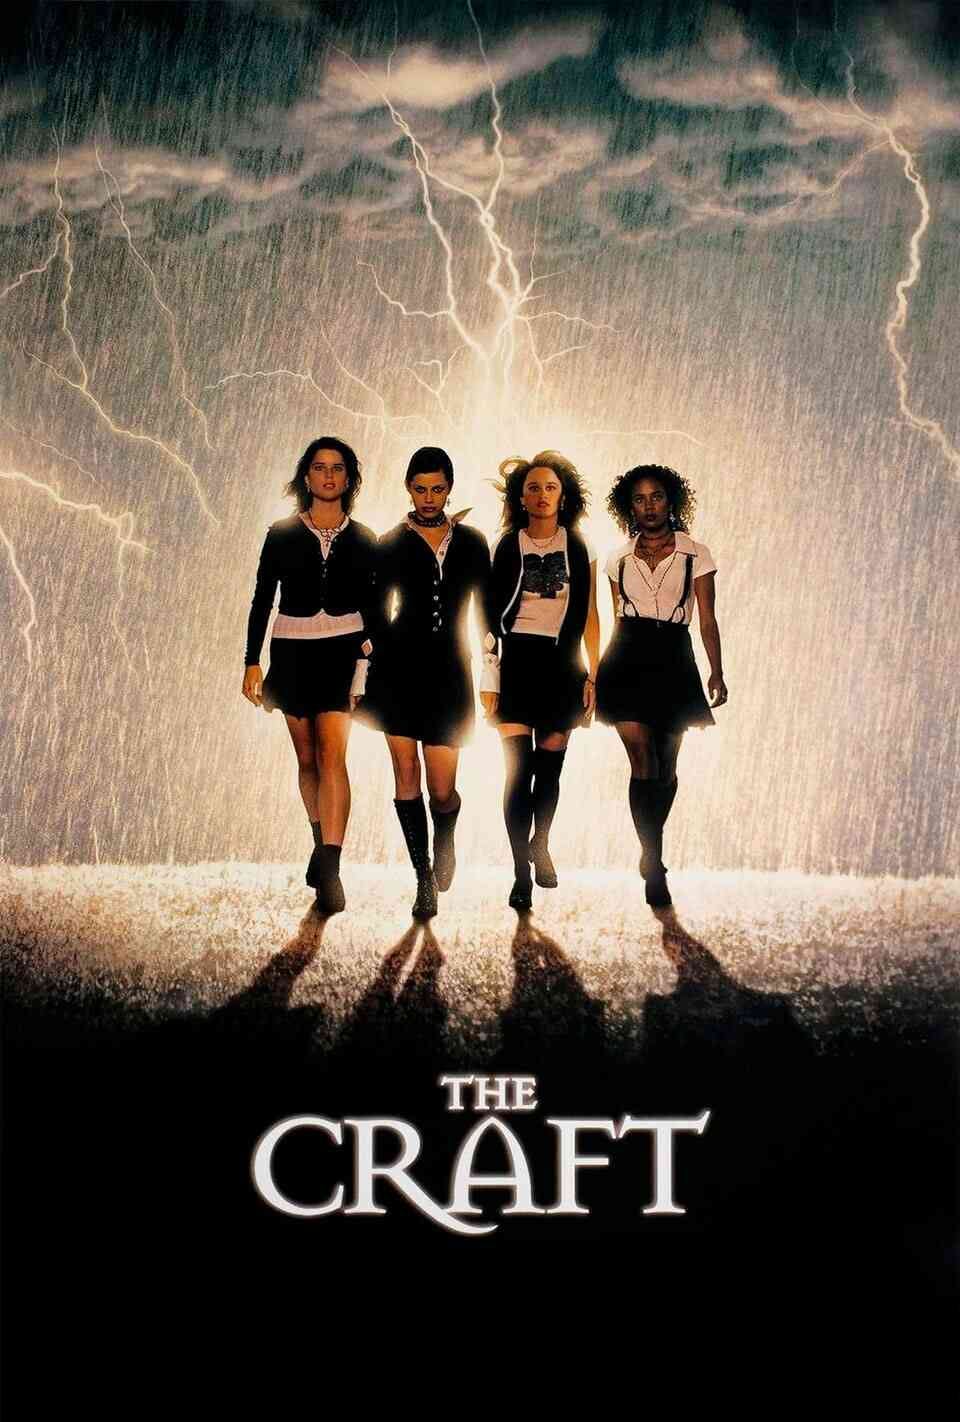 Read The Craft screenplay (poster)